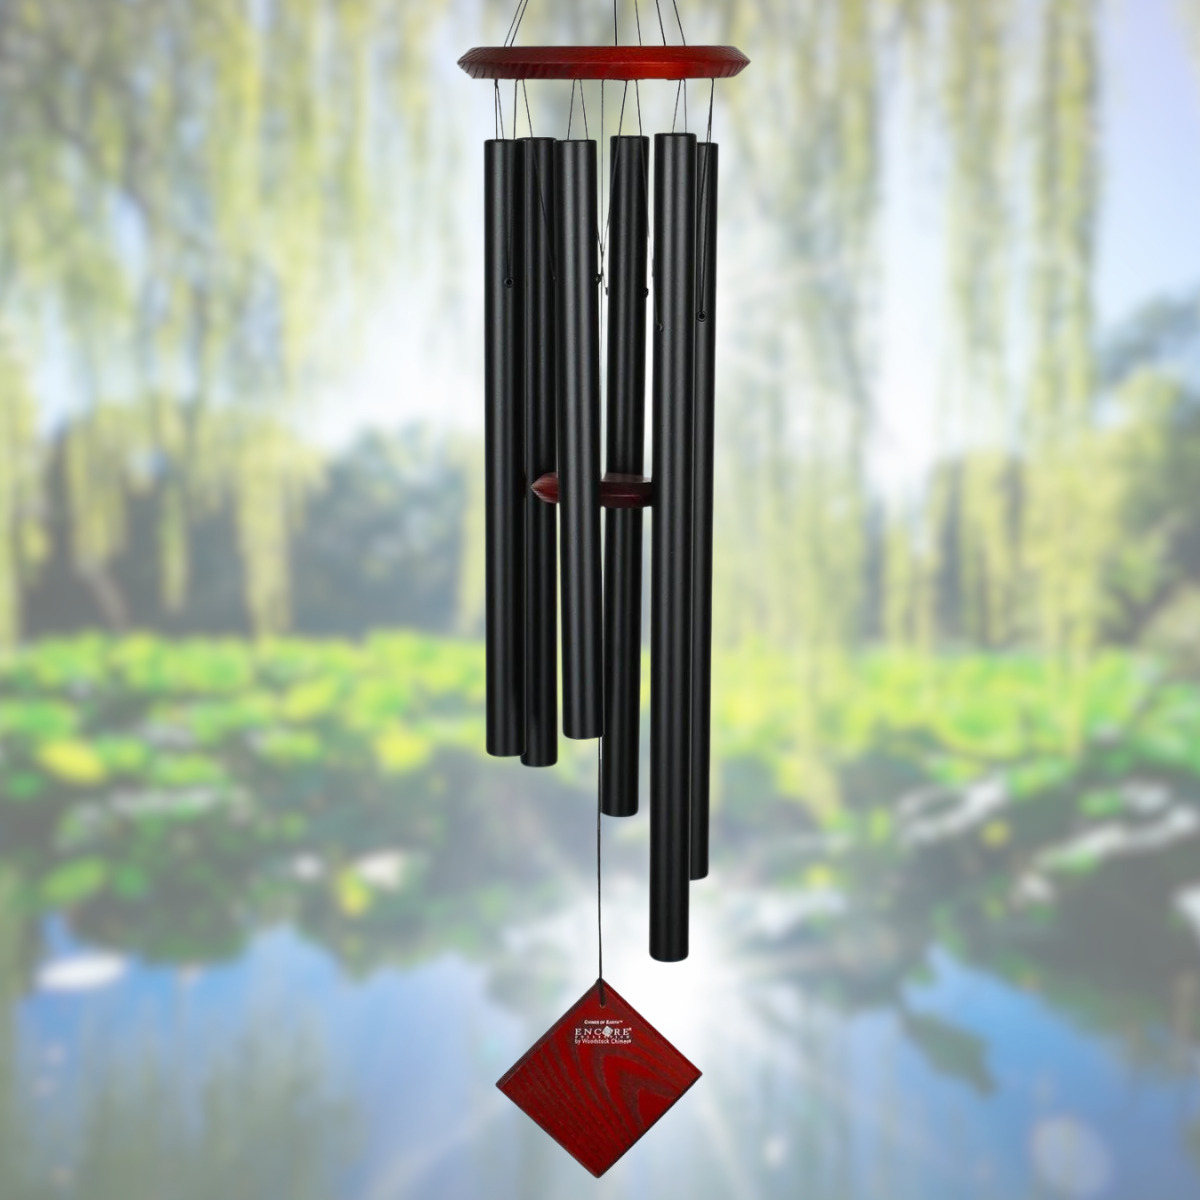 Woodstock Percussion 37 Inch Chimes of Earth Wind Chime - Black - Engravable Sail